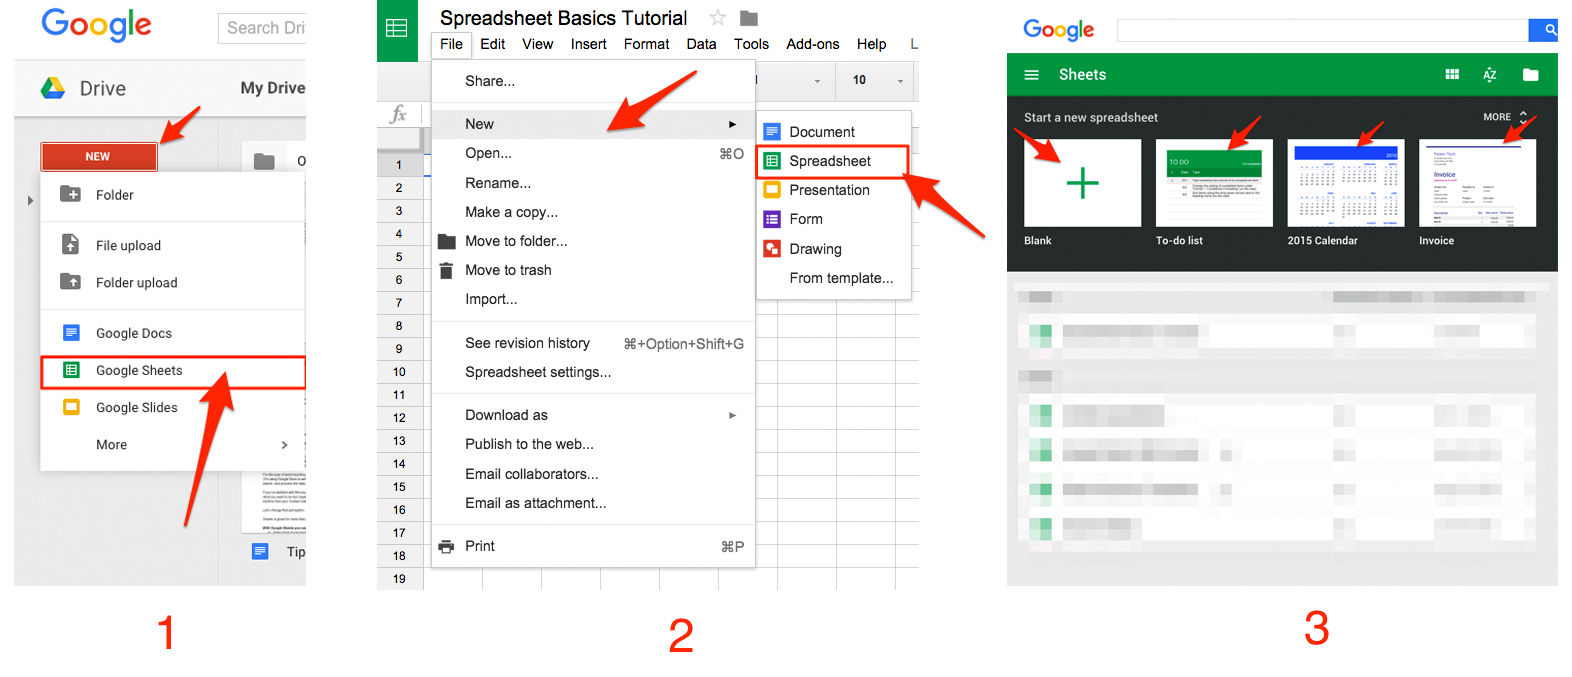 Create Spreadsheet Inside Google Sheets 101: The Beginner's Guide To Online Spreadsheets  The